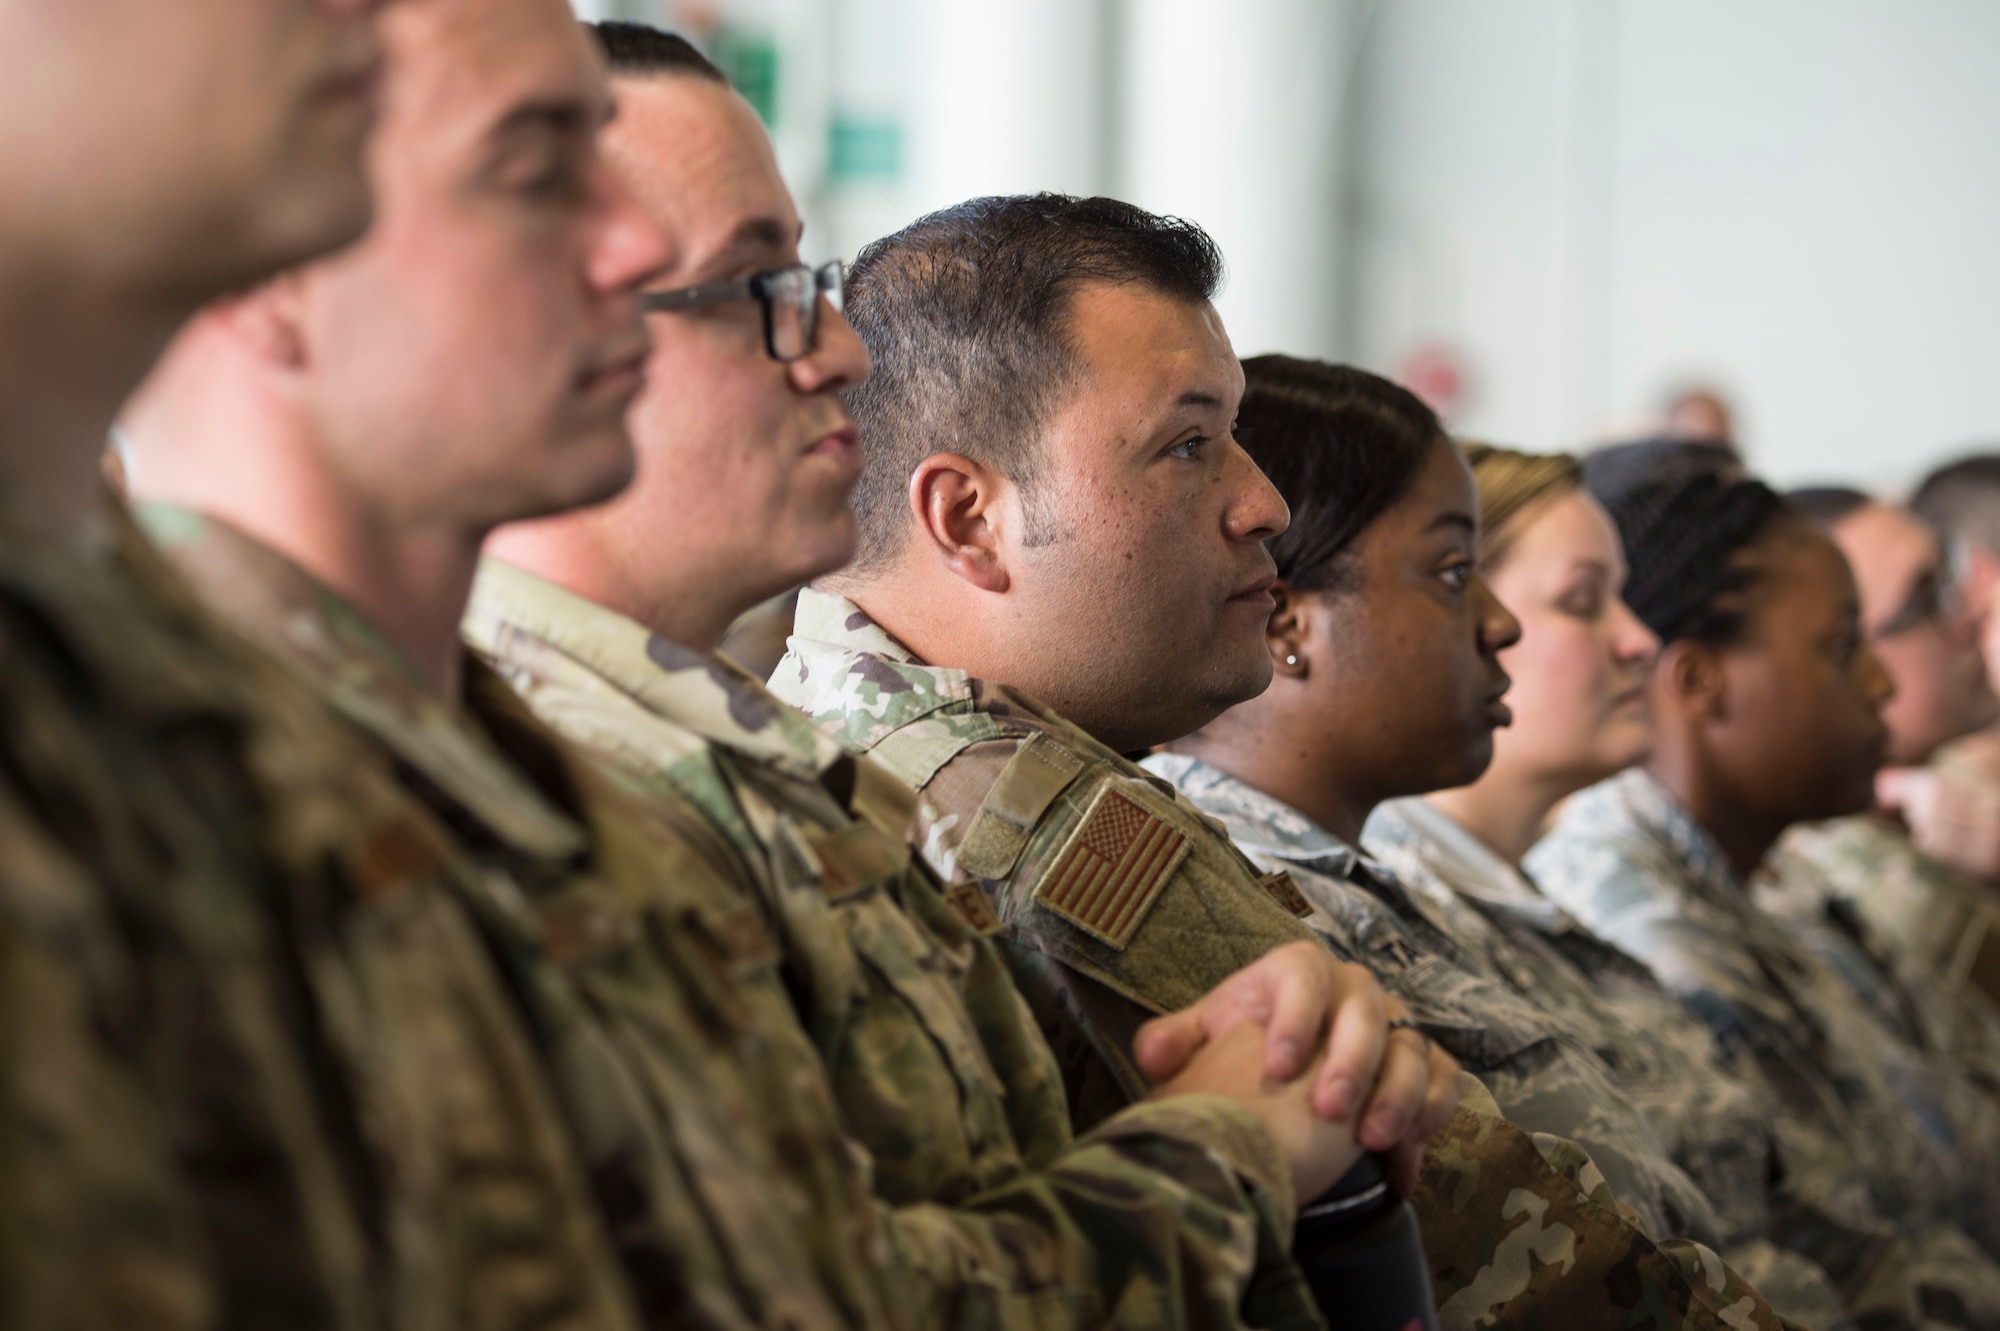 More than 1,800 Airmen listen to Air Force Chief of Staff Gen. David L. Goldfein speak during an all call at Joint Base Pearl Harbor-Hickam, Hawaii, Aug. 14, 2019. During the all call, Goldfein covered topics such as multi-domain operations, joint leaders and teams and the importance of squadrons in the Air Force. This was Goldfein’s first stop as he visits various units in the Indo-Pacific.  (U.S. Air Force photo by Tech. Sgt. Heather Redman)